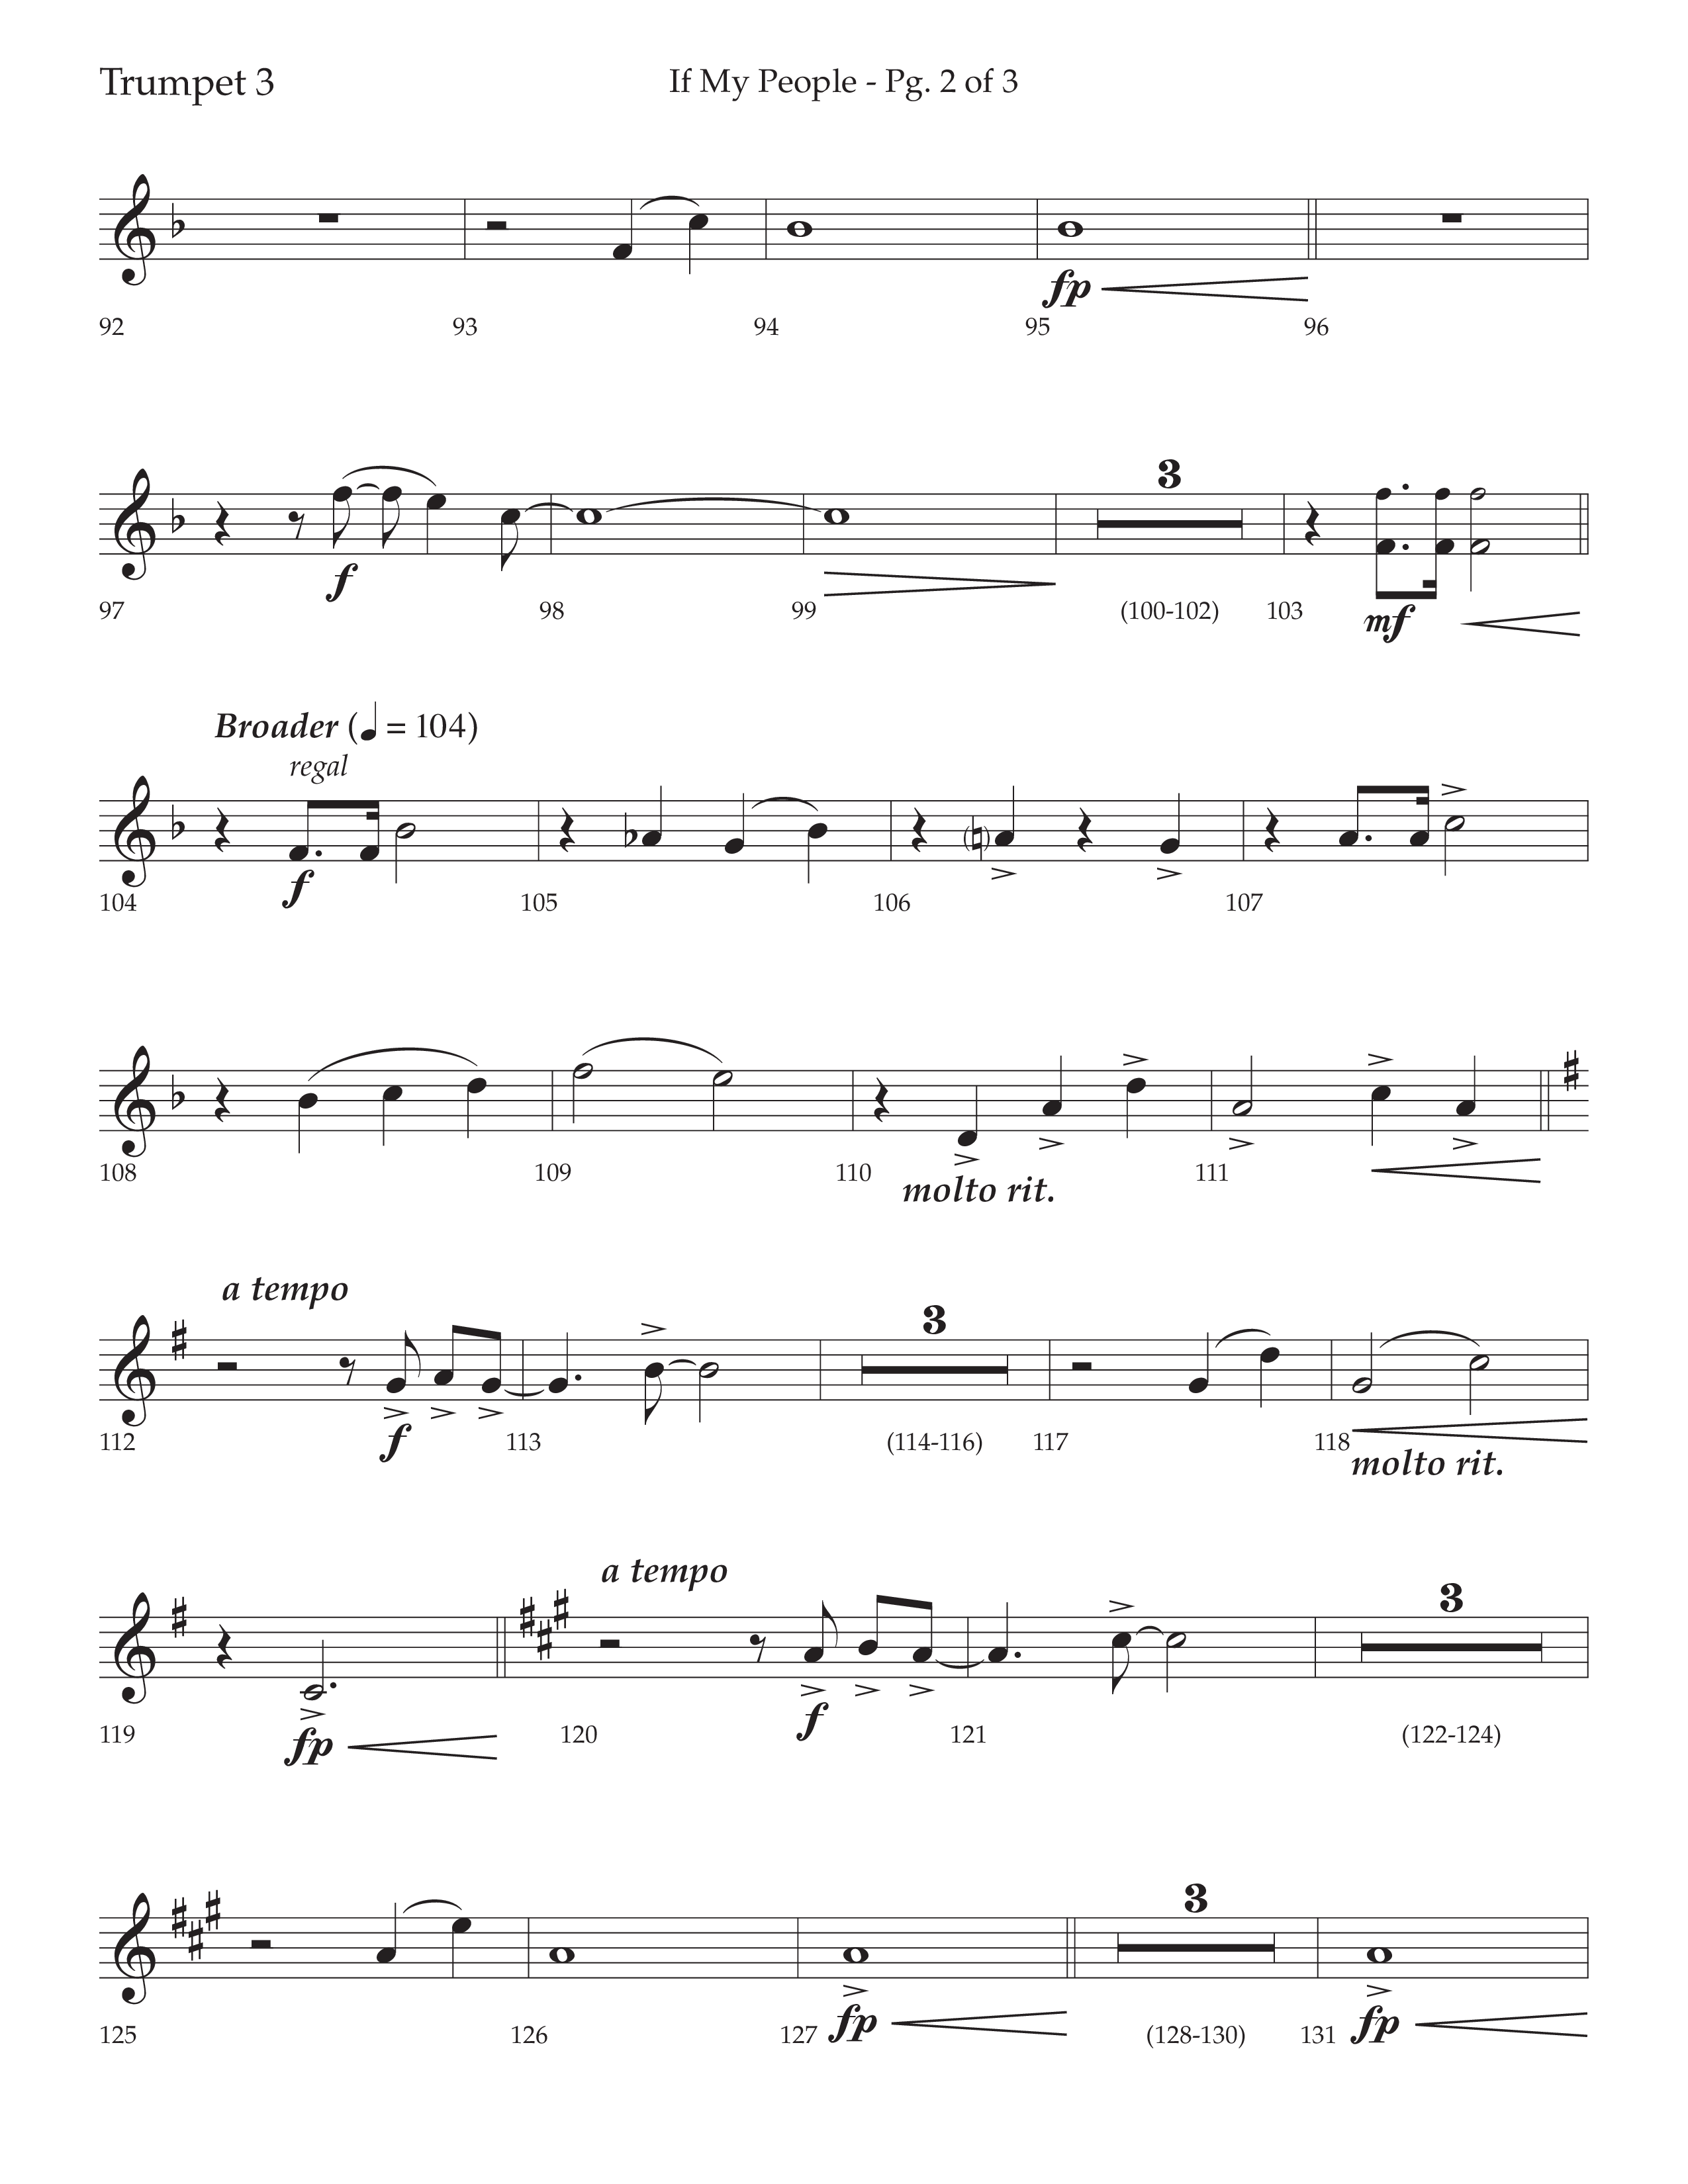 If My People (Choral Anthem SATB) Trumpet 3 (Lifeway Choral / Arr. David Wise / Orch. David Shipps)